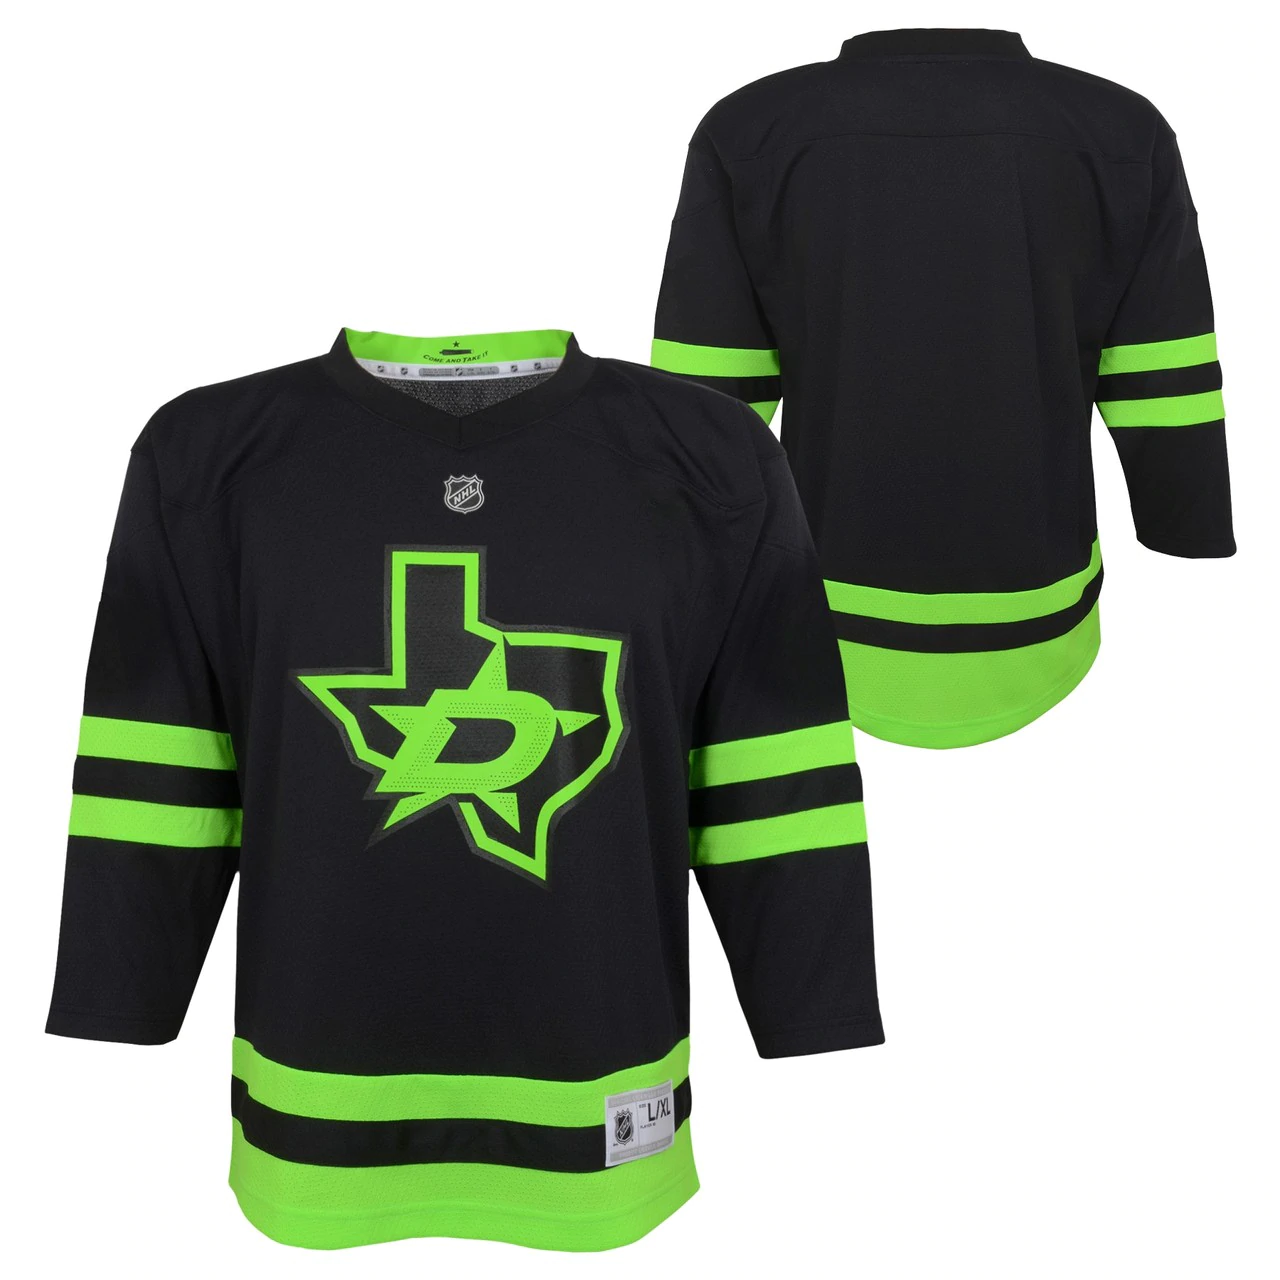 DALLAS STARS OUTERSTUFF KIDS BLACKOUT 3RD JERSEY - FRONT AND BACK VIEW